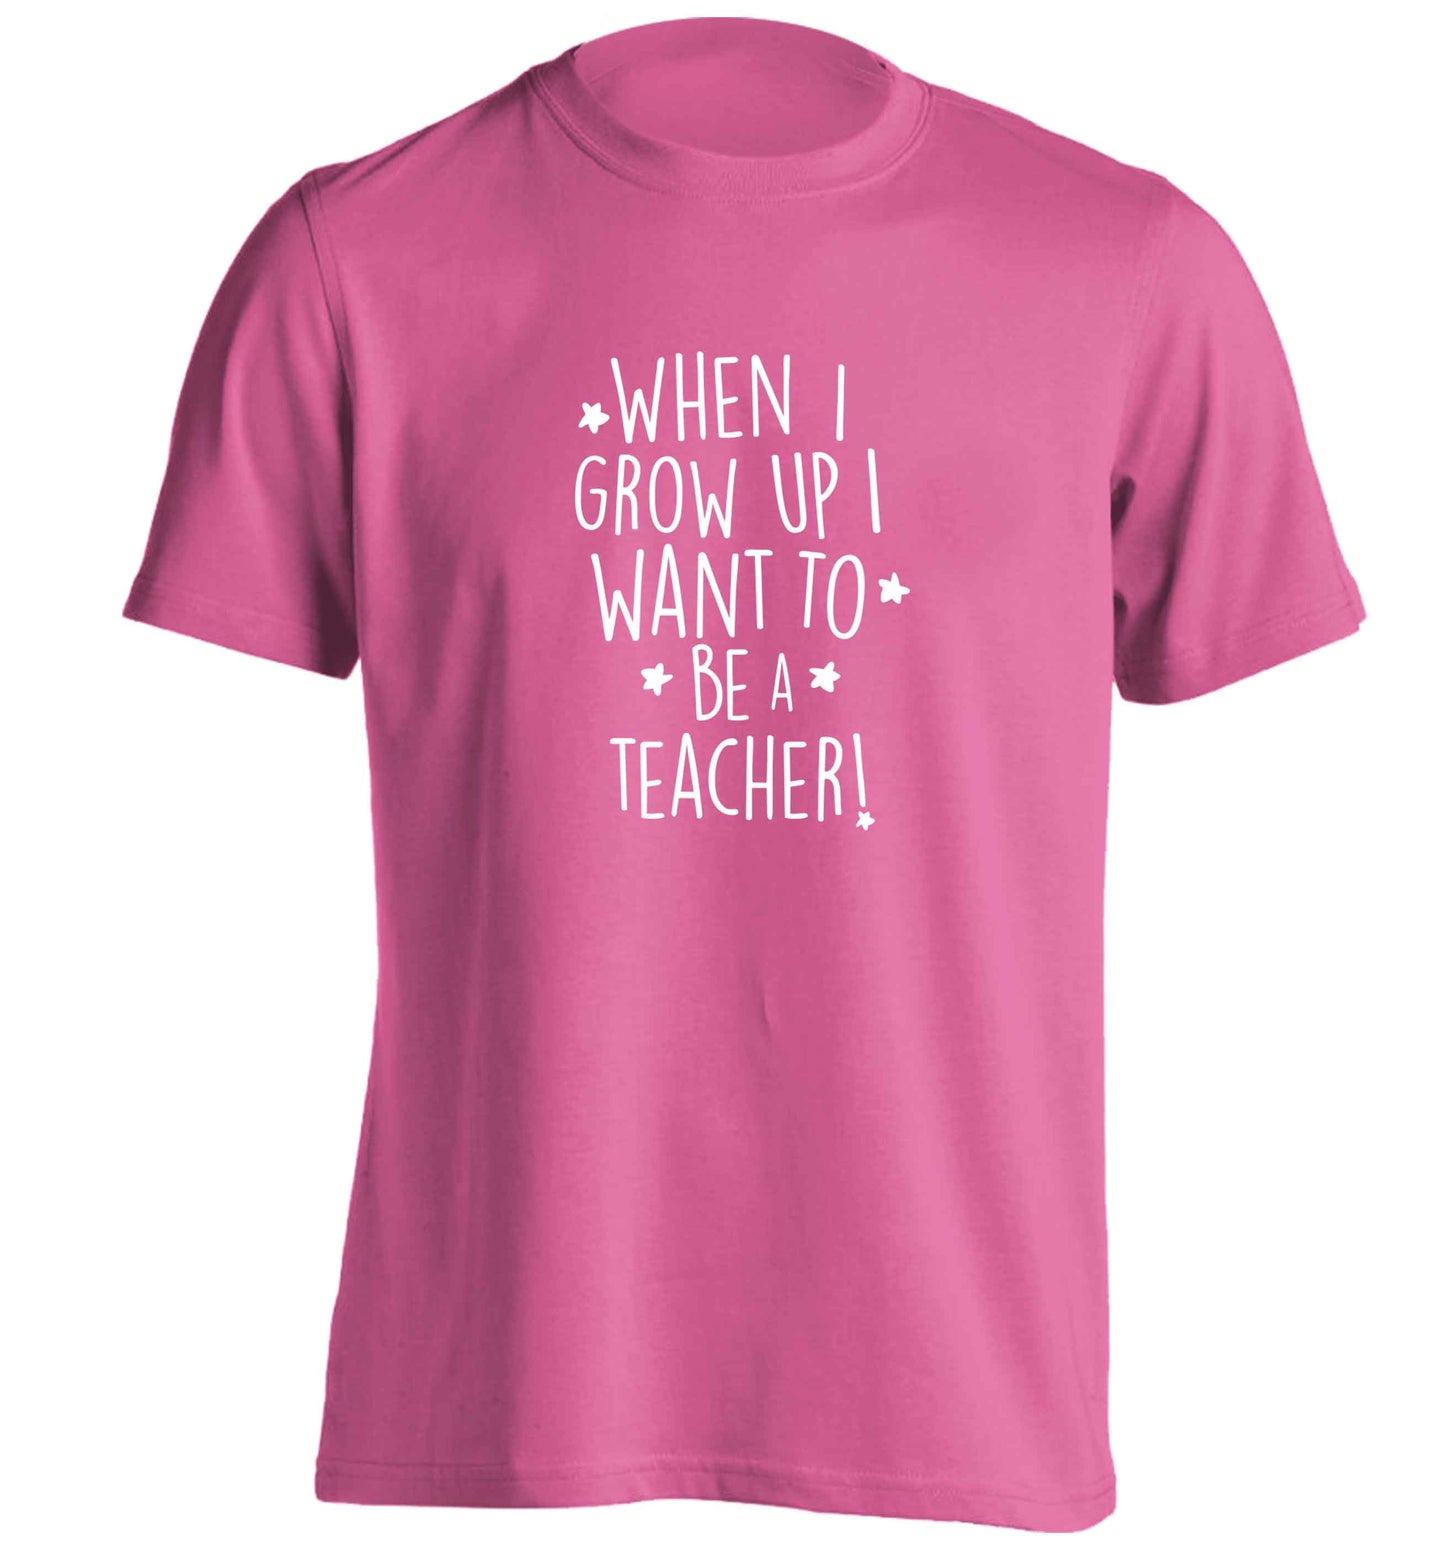 When I grow up I want to be a teacher adults unisex pink Tshirt 2XL